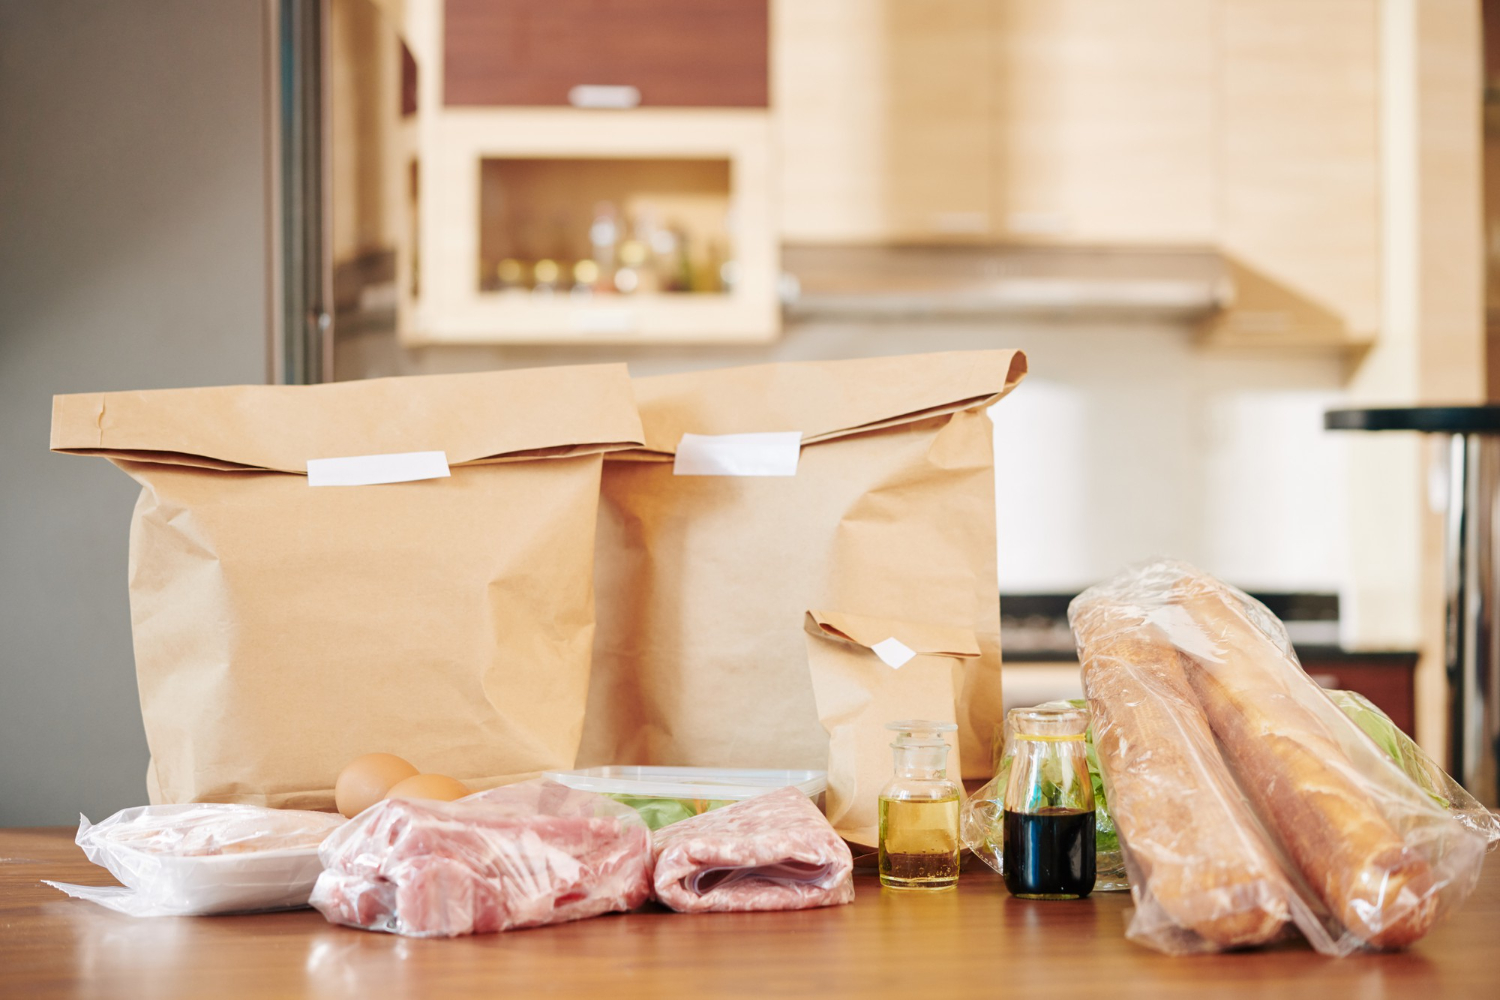 How do you package food to keep it from spoiling?